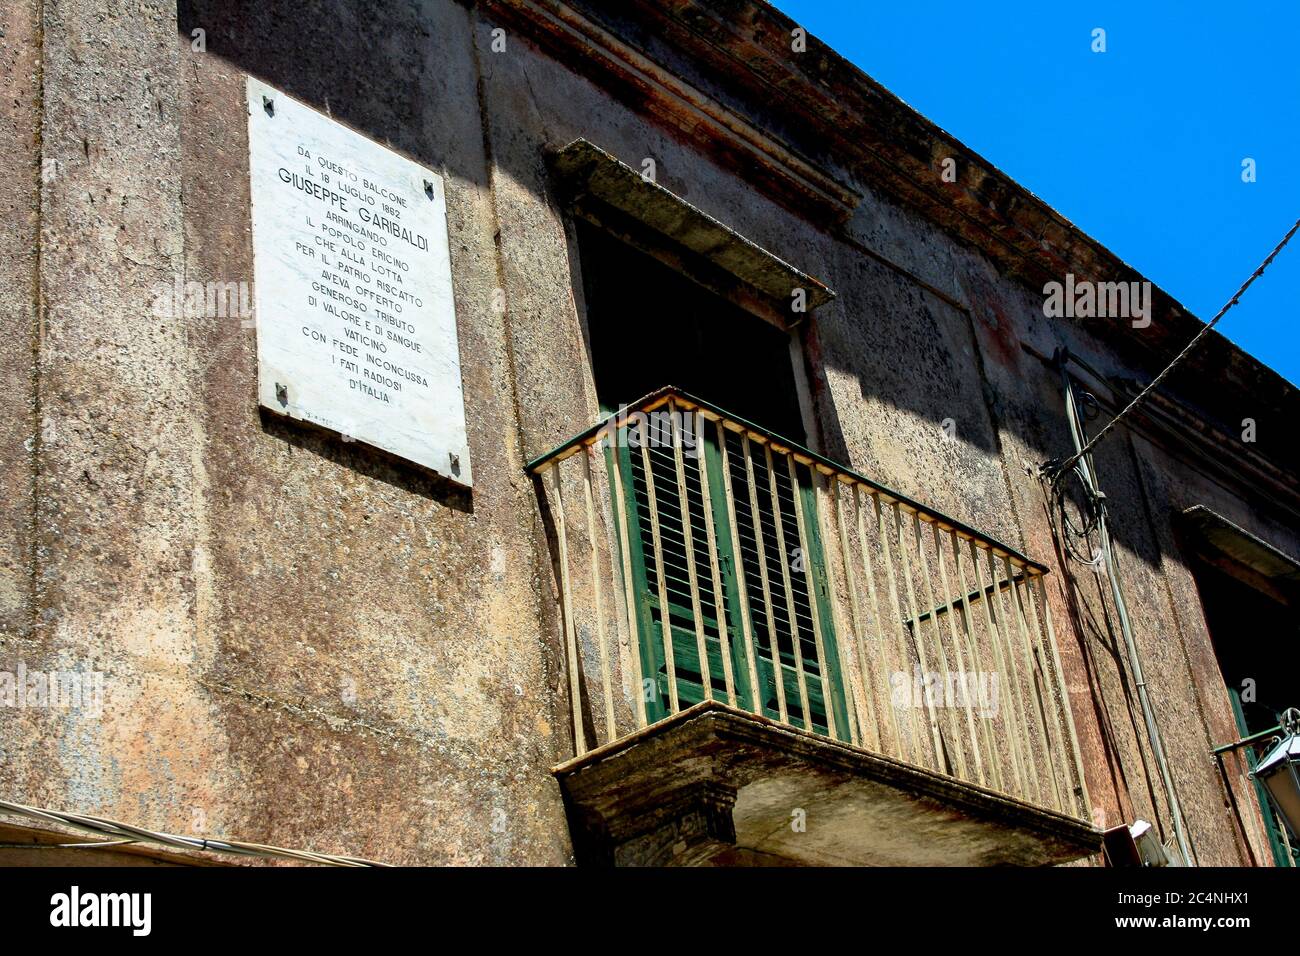 From this balcony en Erice, Giuseppe Garibaldi spoke to the town people on the 18th of July 1862. (Sicily/ italy) Stock Photo